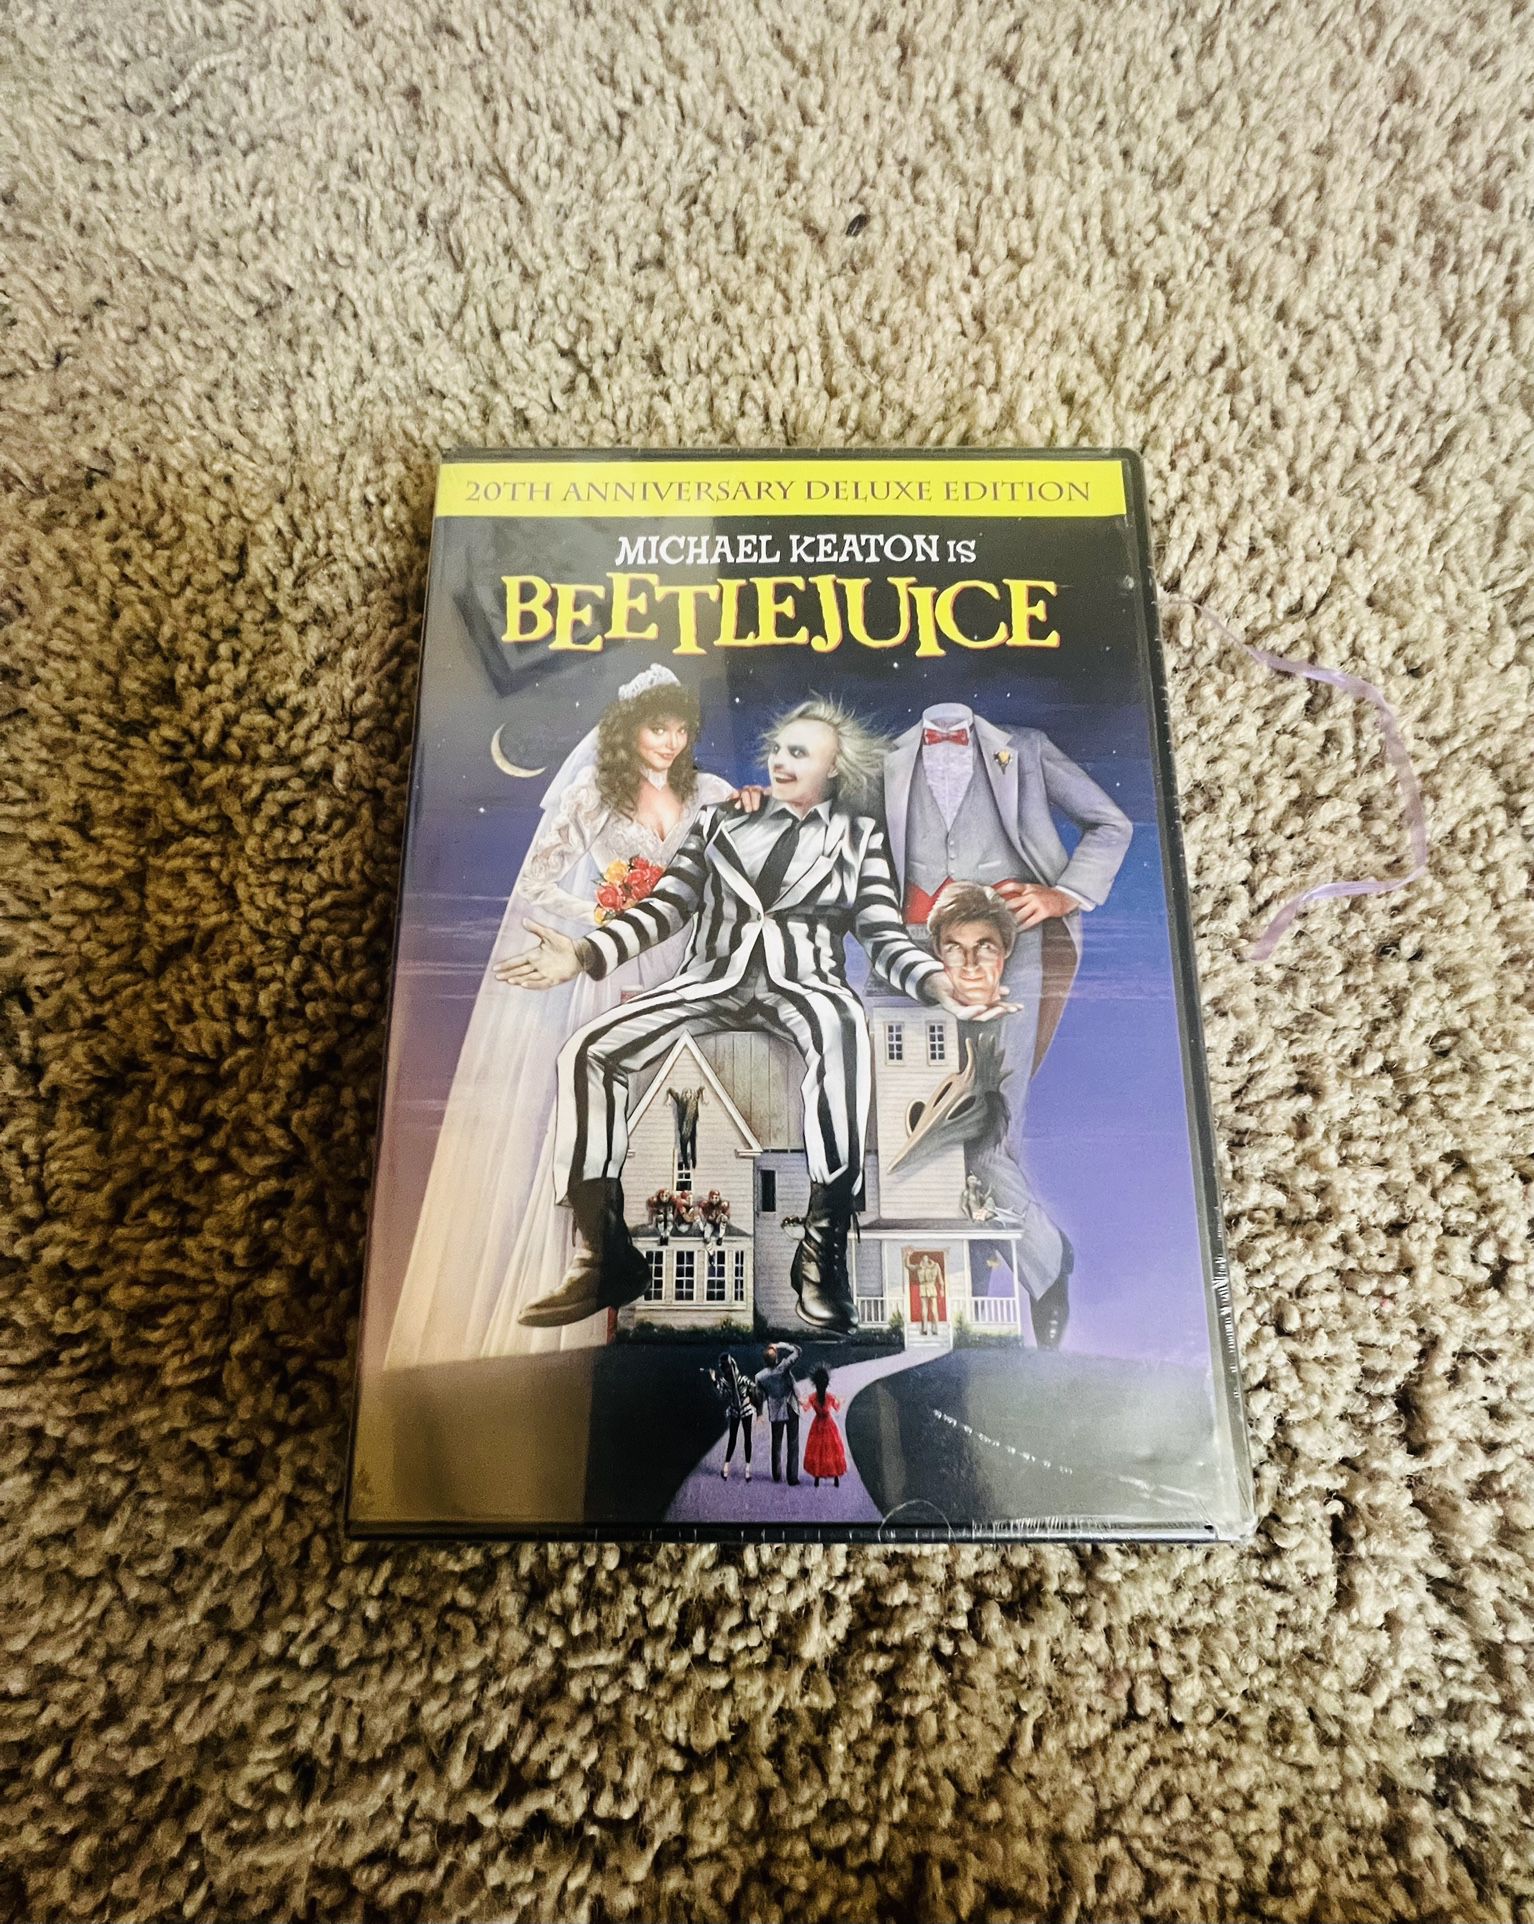 Beetle juice 20th Anniversary Deluxe Edition DVD 